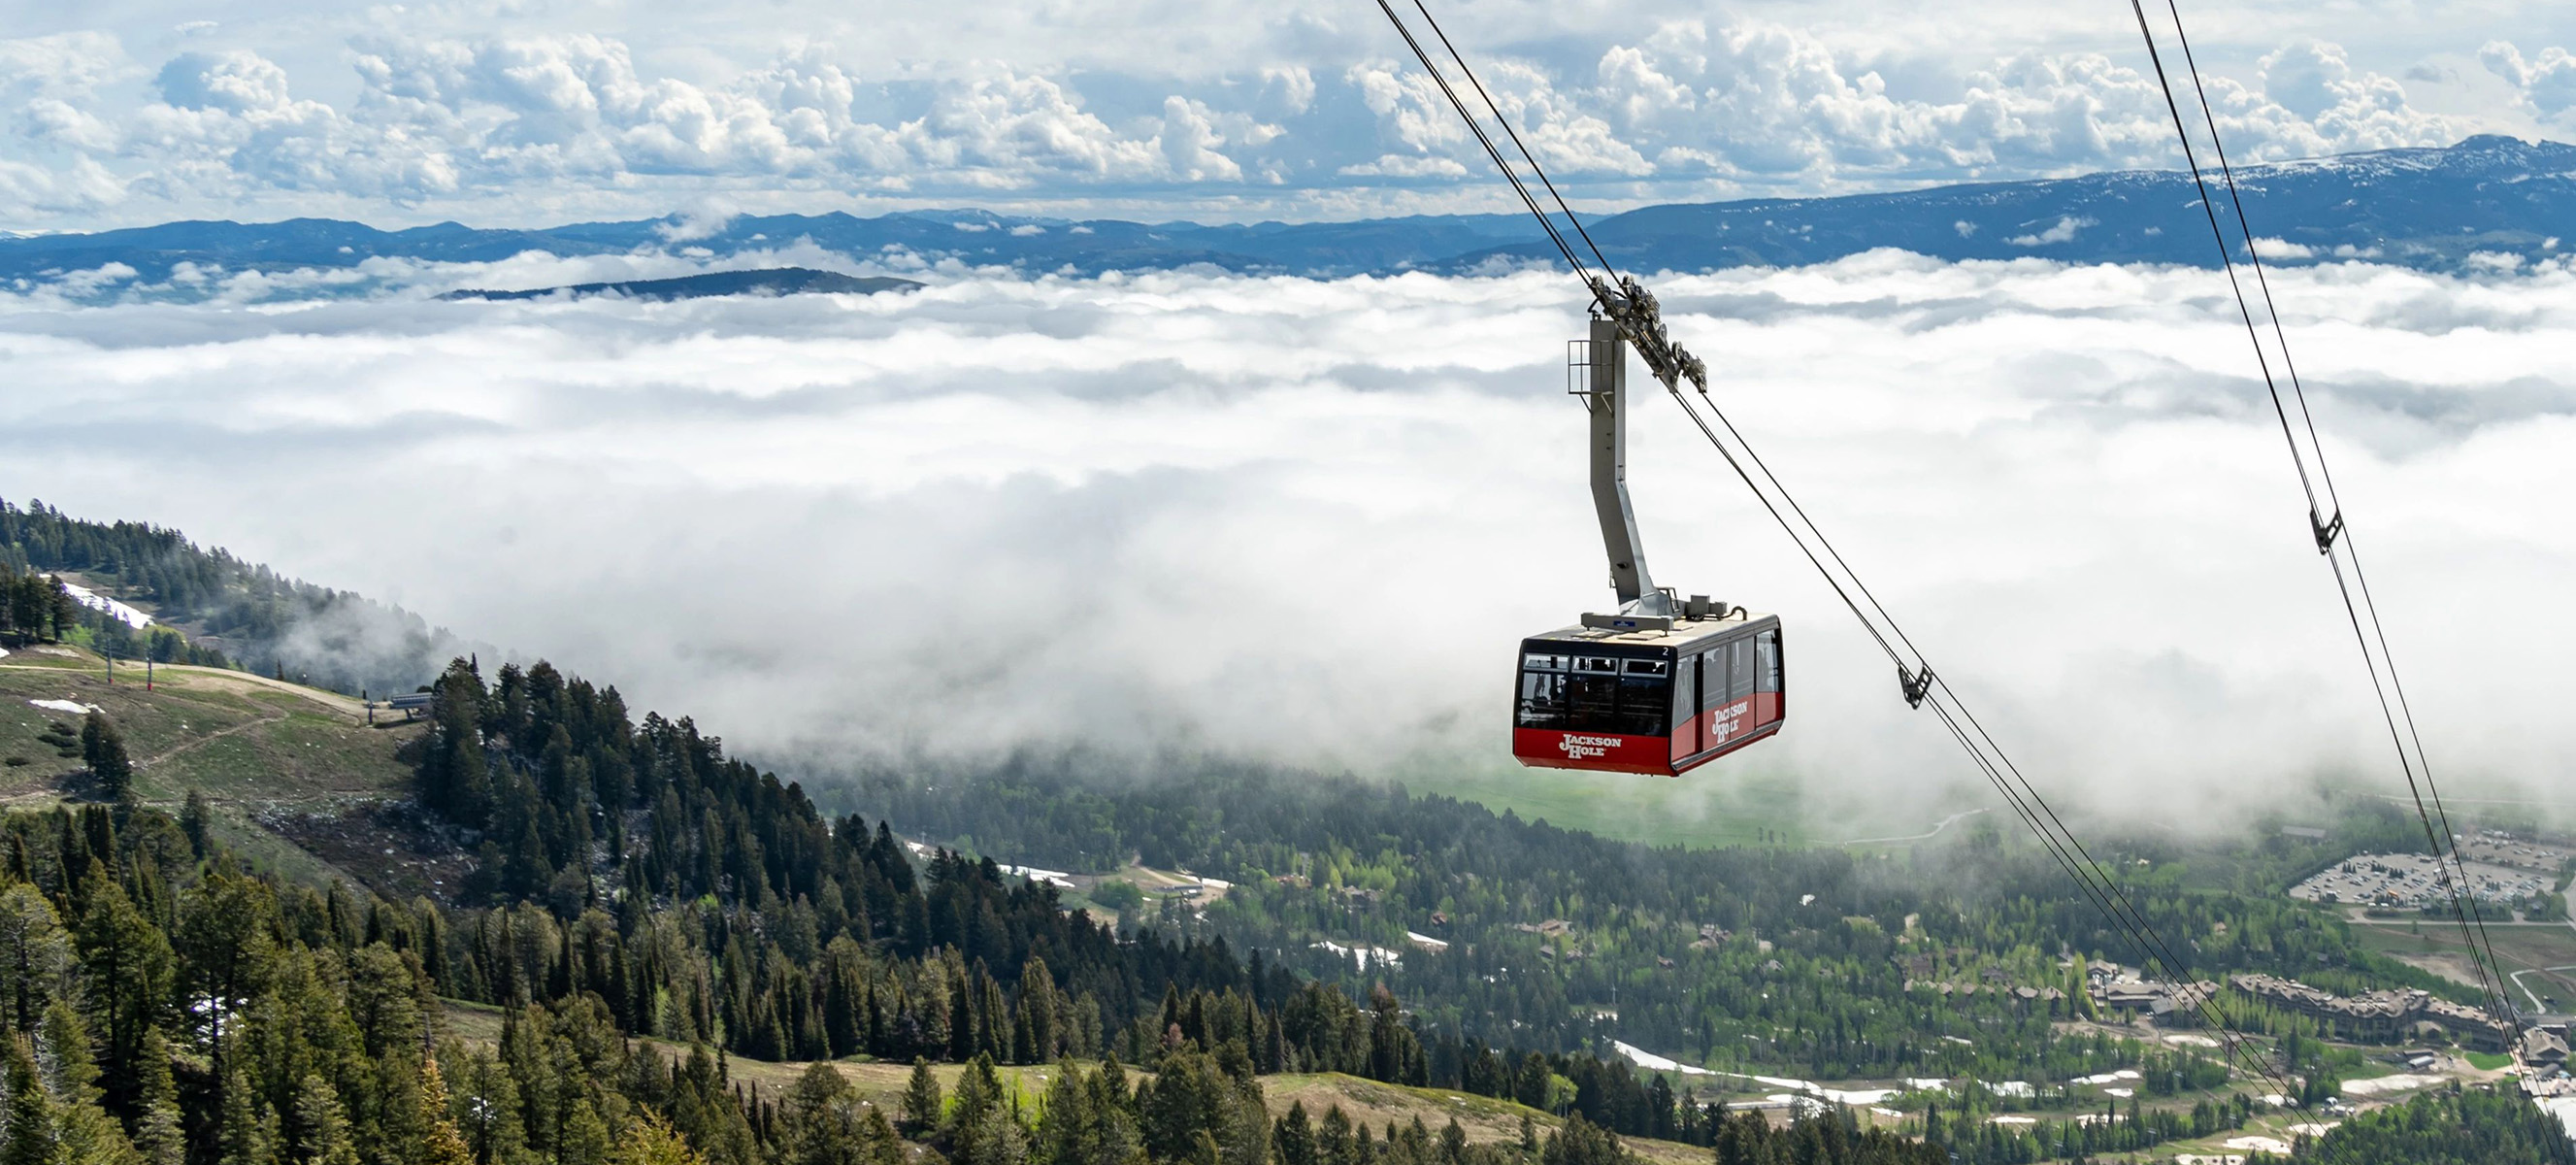 The Aerial Tram flying above the clouds